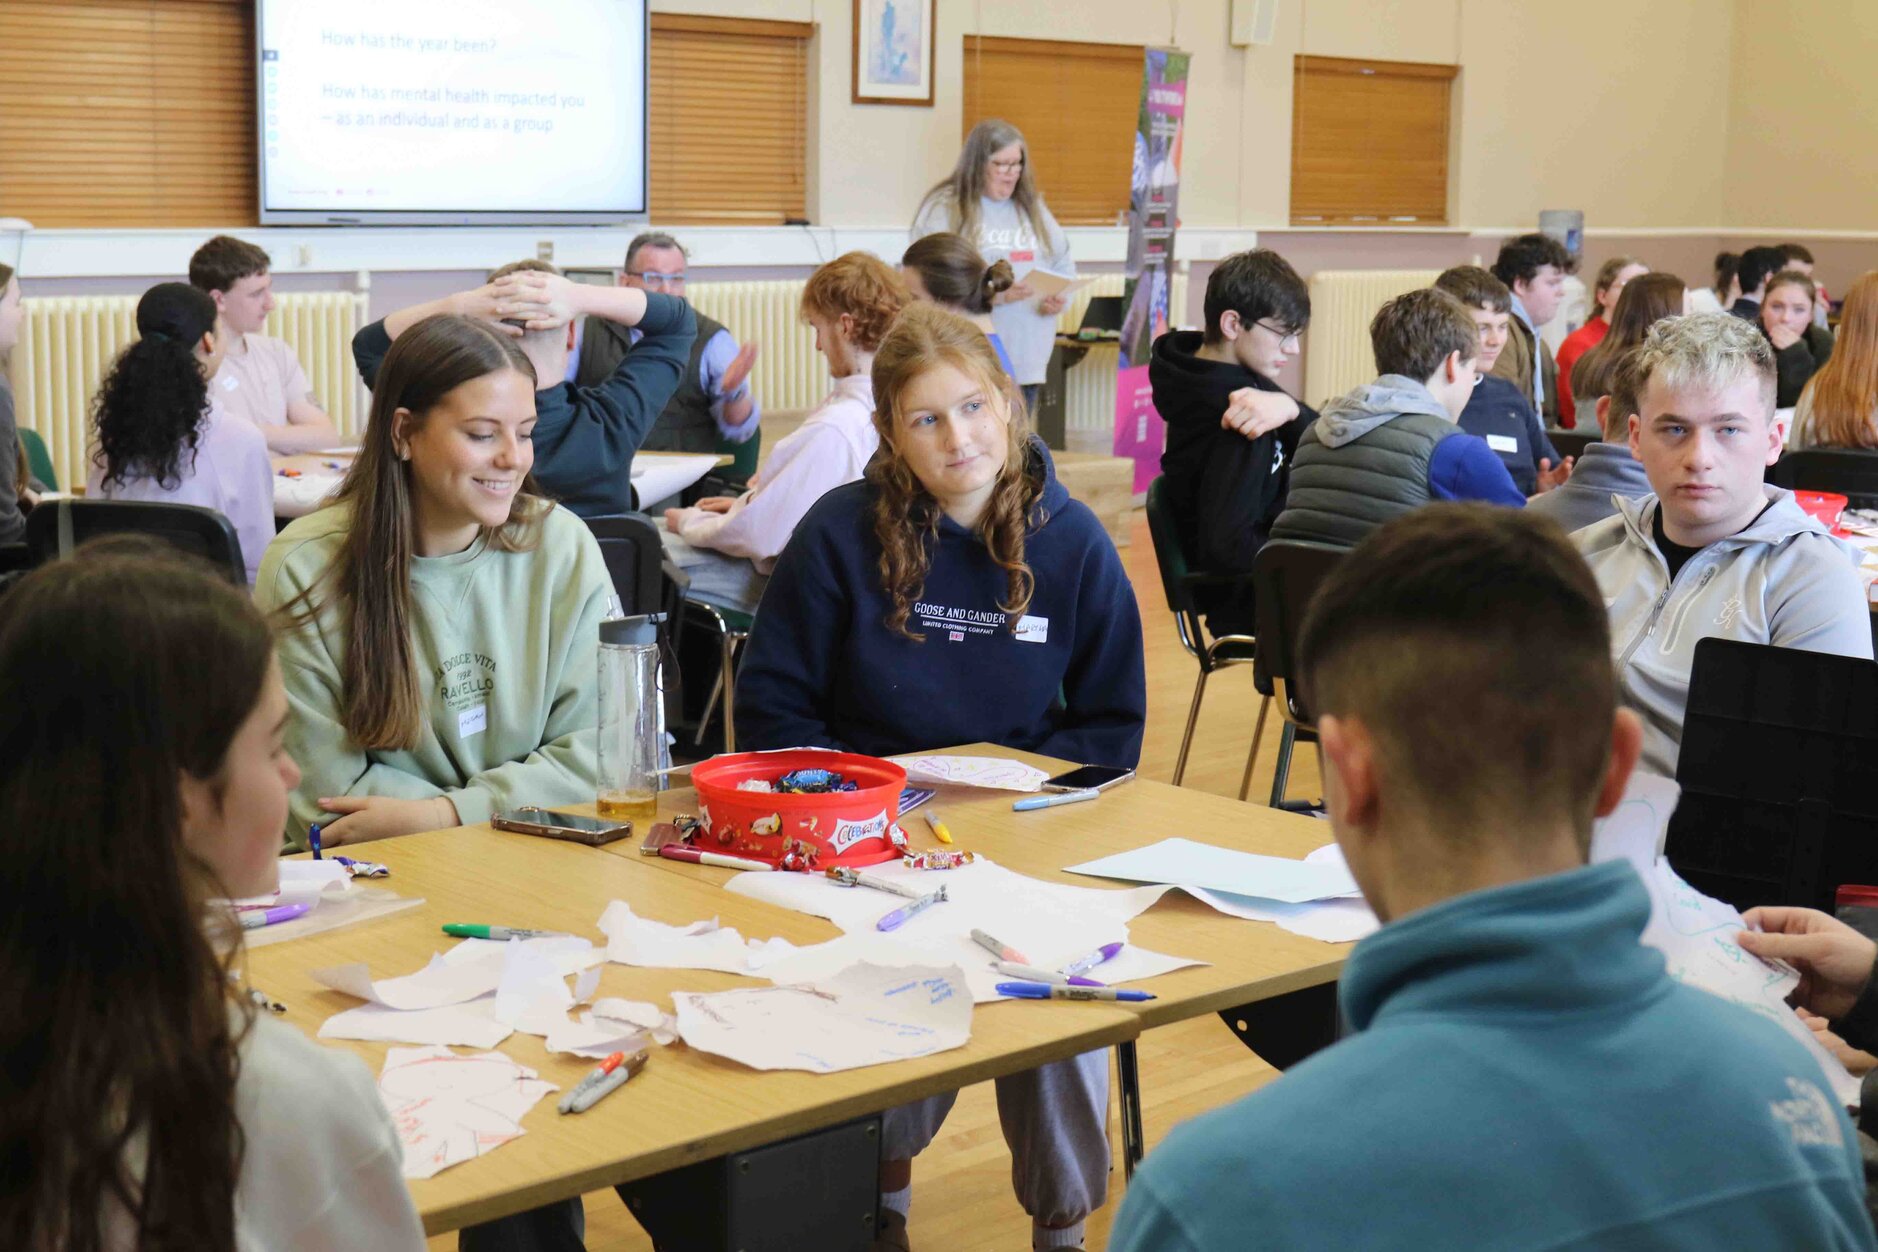 ‘How can the Church convince young people that God loves them?’ - Youth Forum participants encouraged to be an active generation for the Gospel.